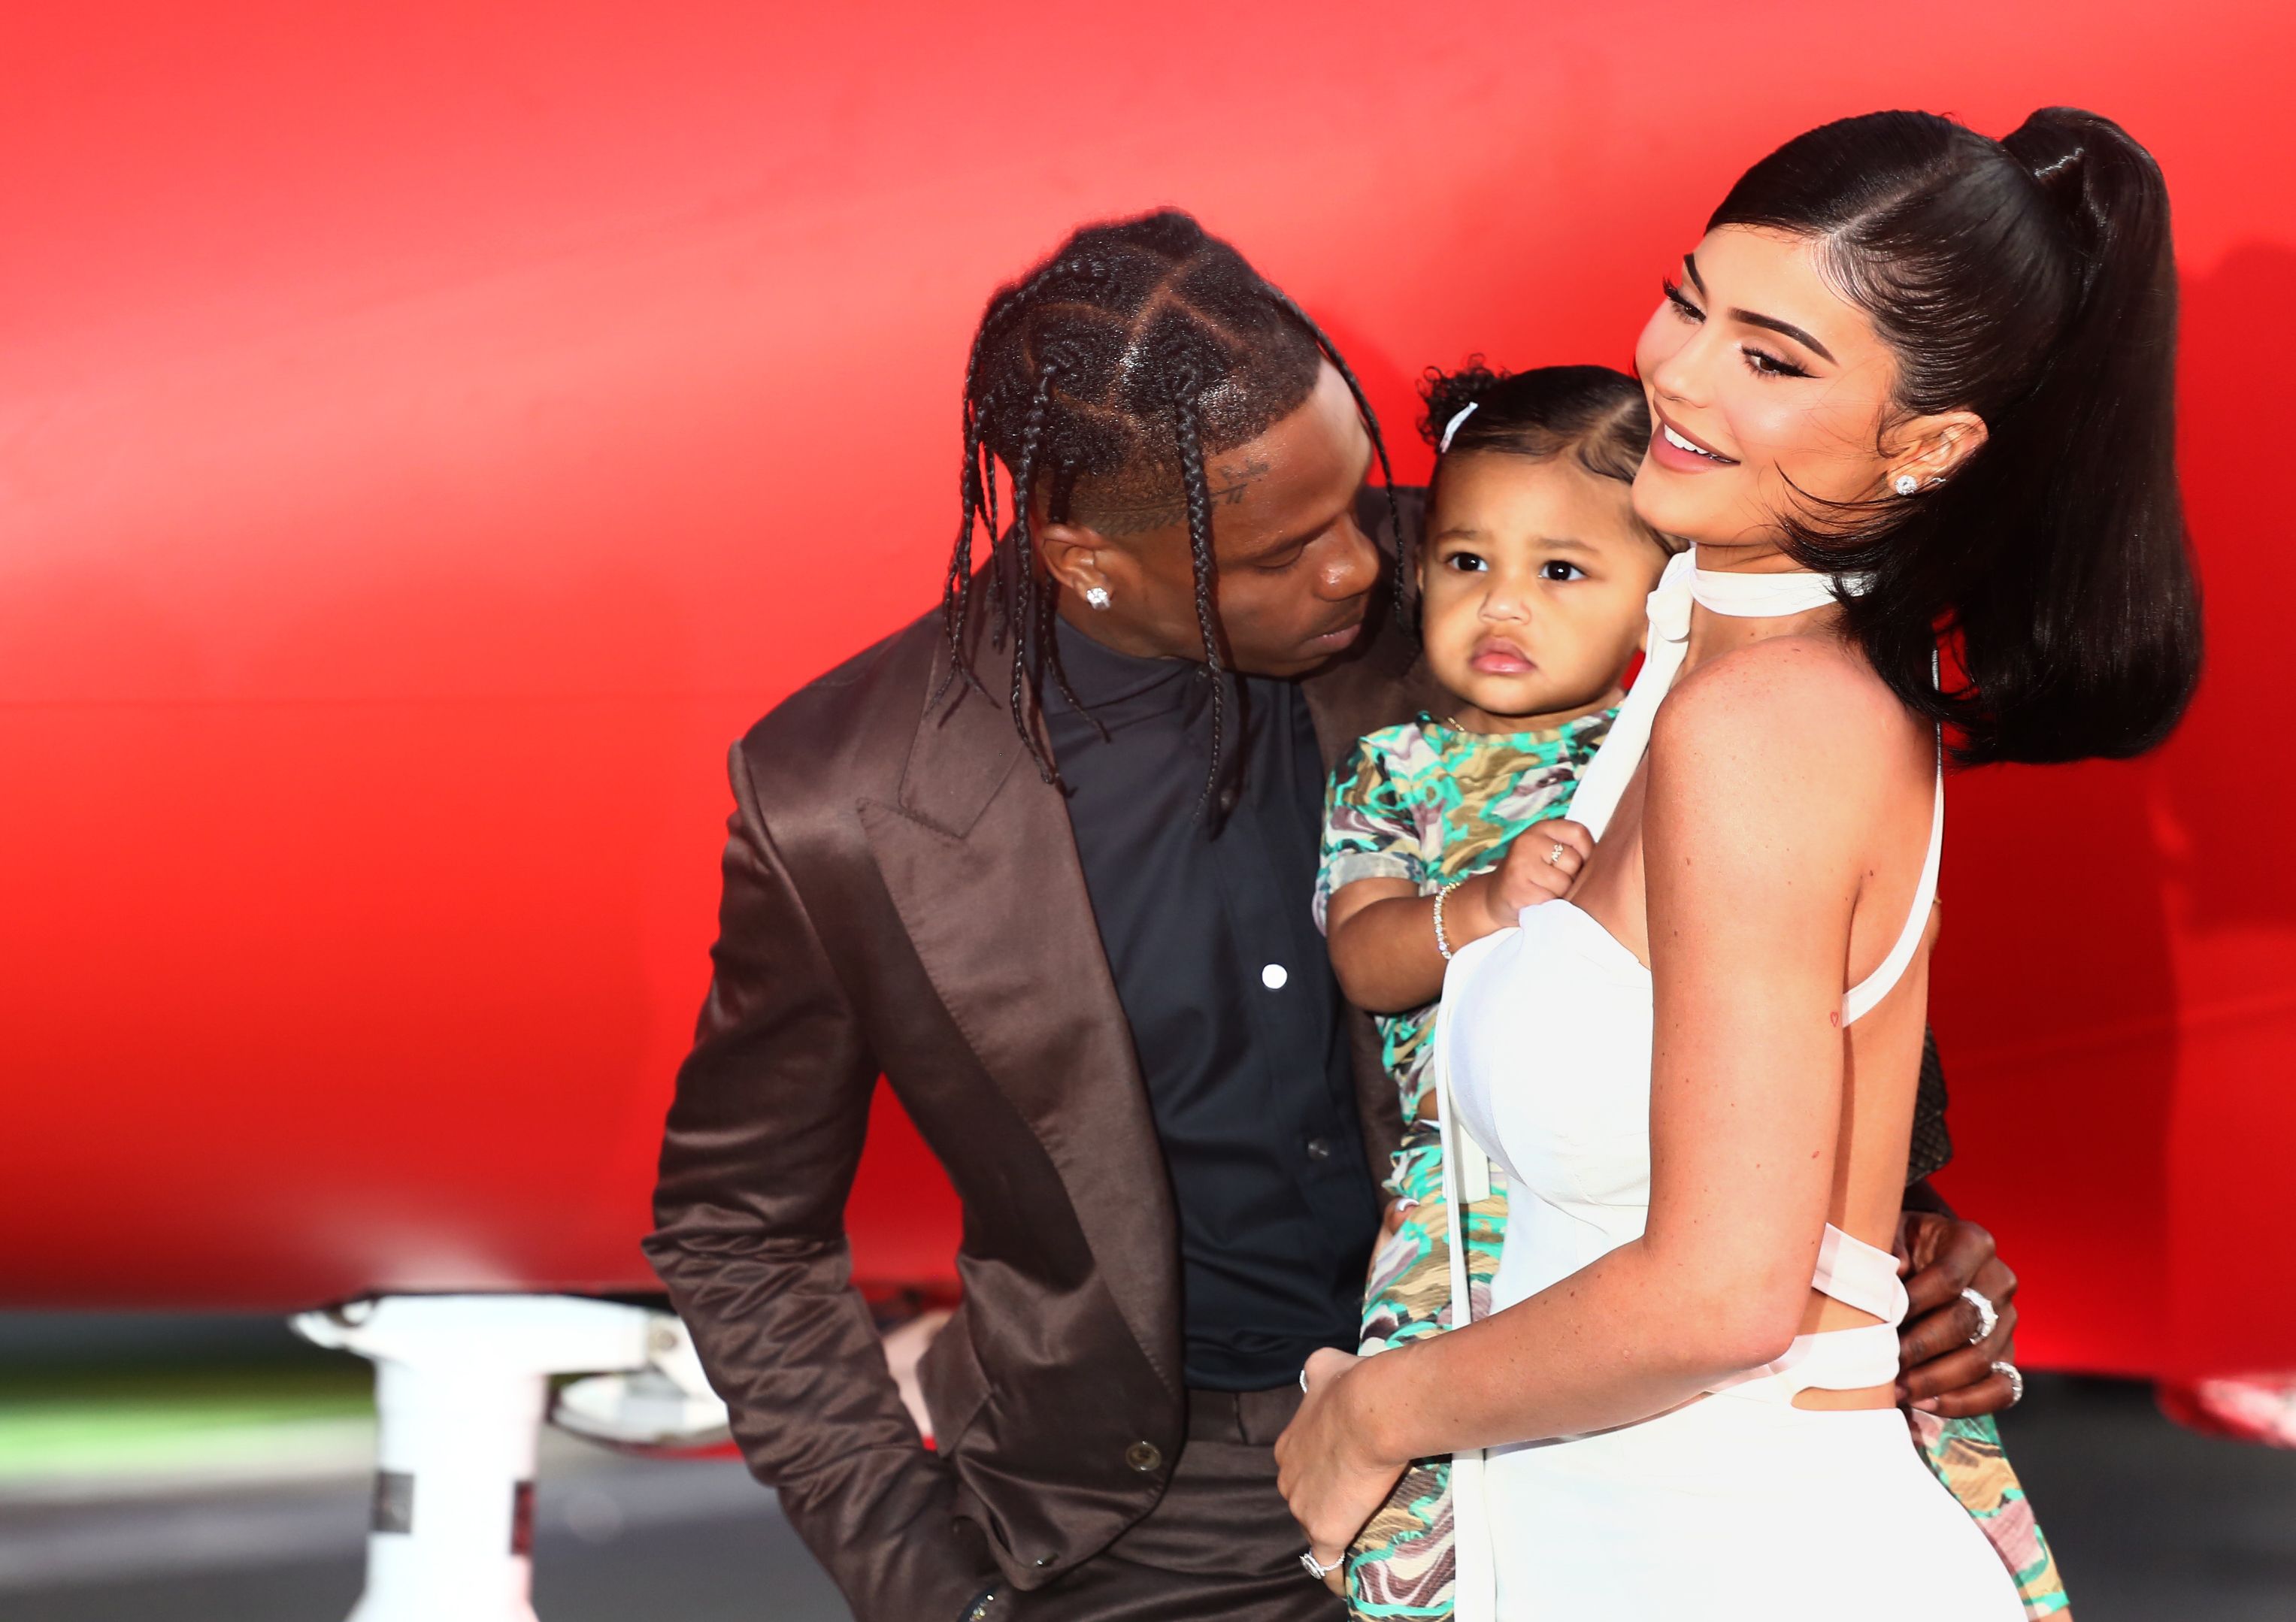 Travis Scott and Kylie Jenner attend the Travis Scott: "Look Mom I Can Fly" Los Angeles Premiere at The Barker Hanger on August 27, 2019 in Santa Monica, California.  | Photo: Getty Images